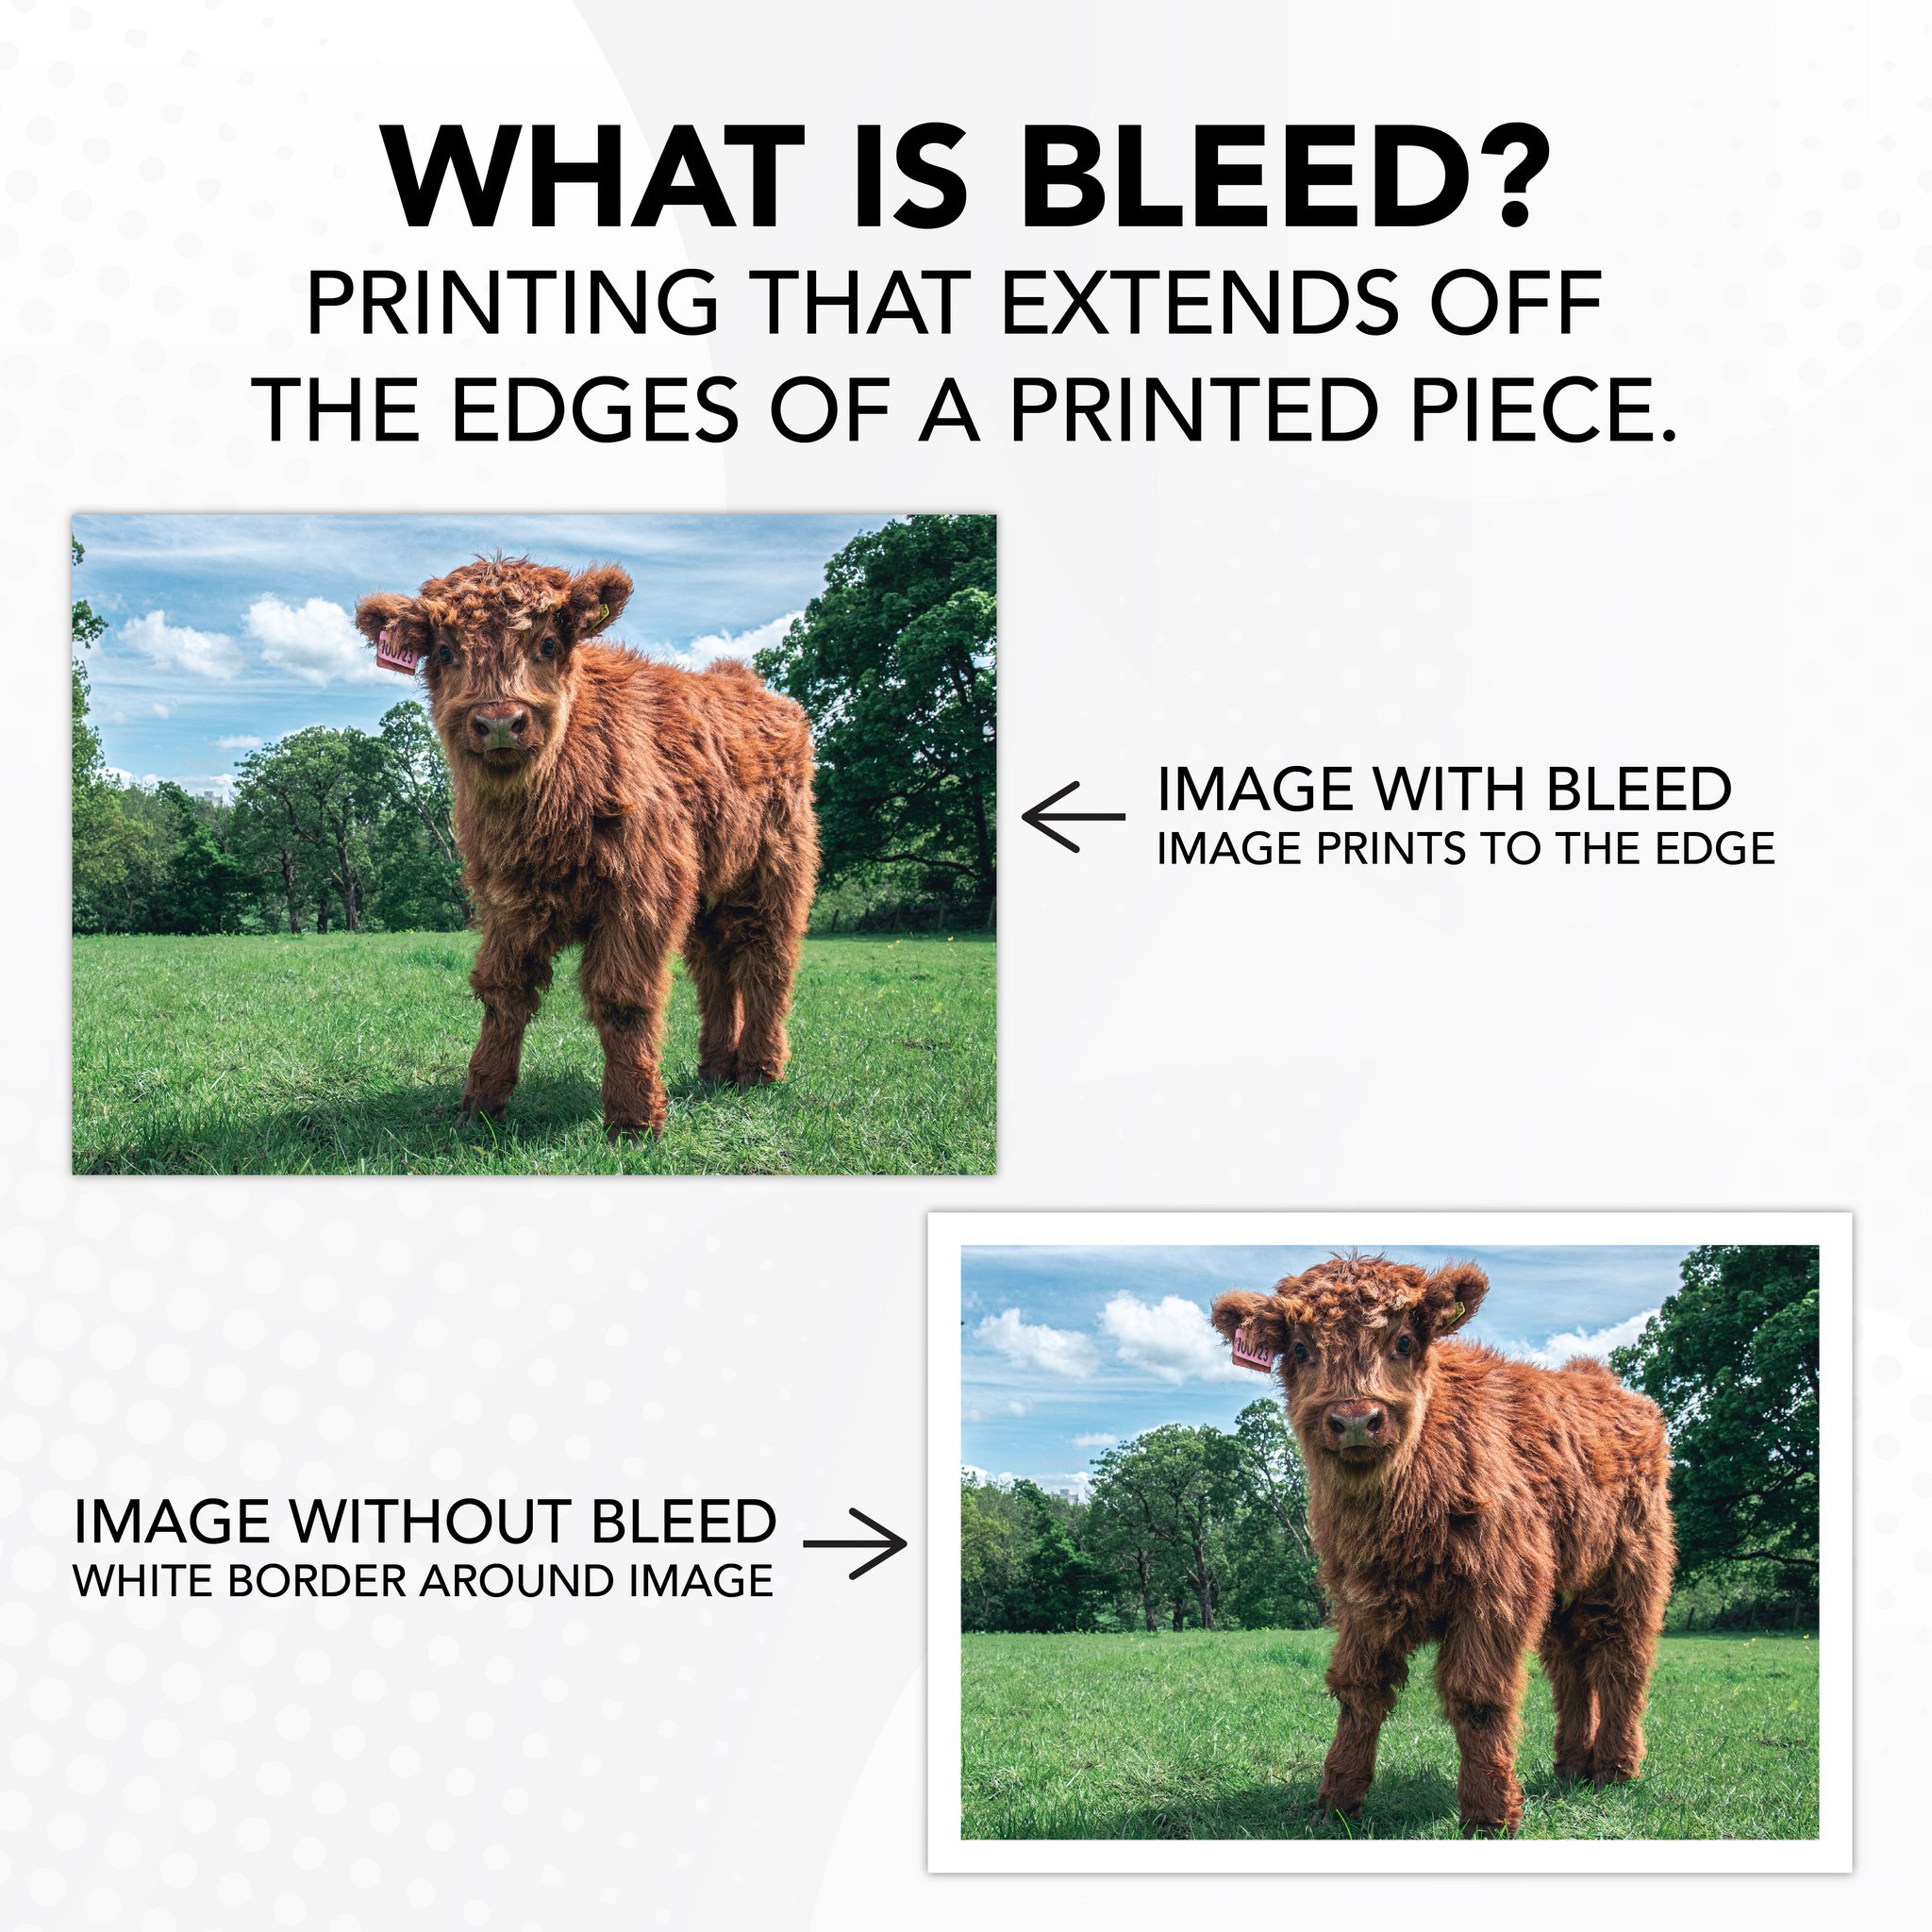 Visual comparison of an image with bleed and without bleed.